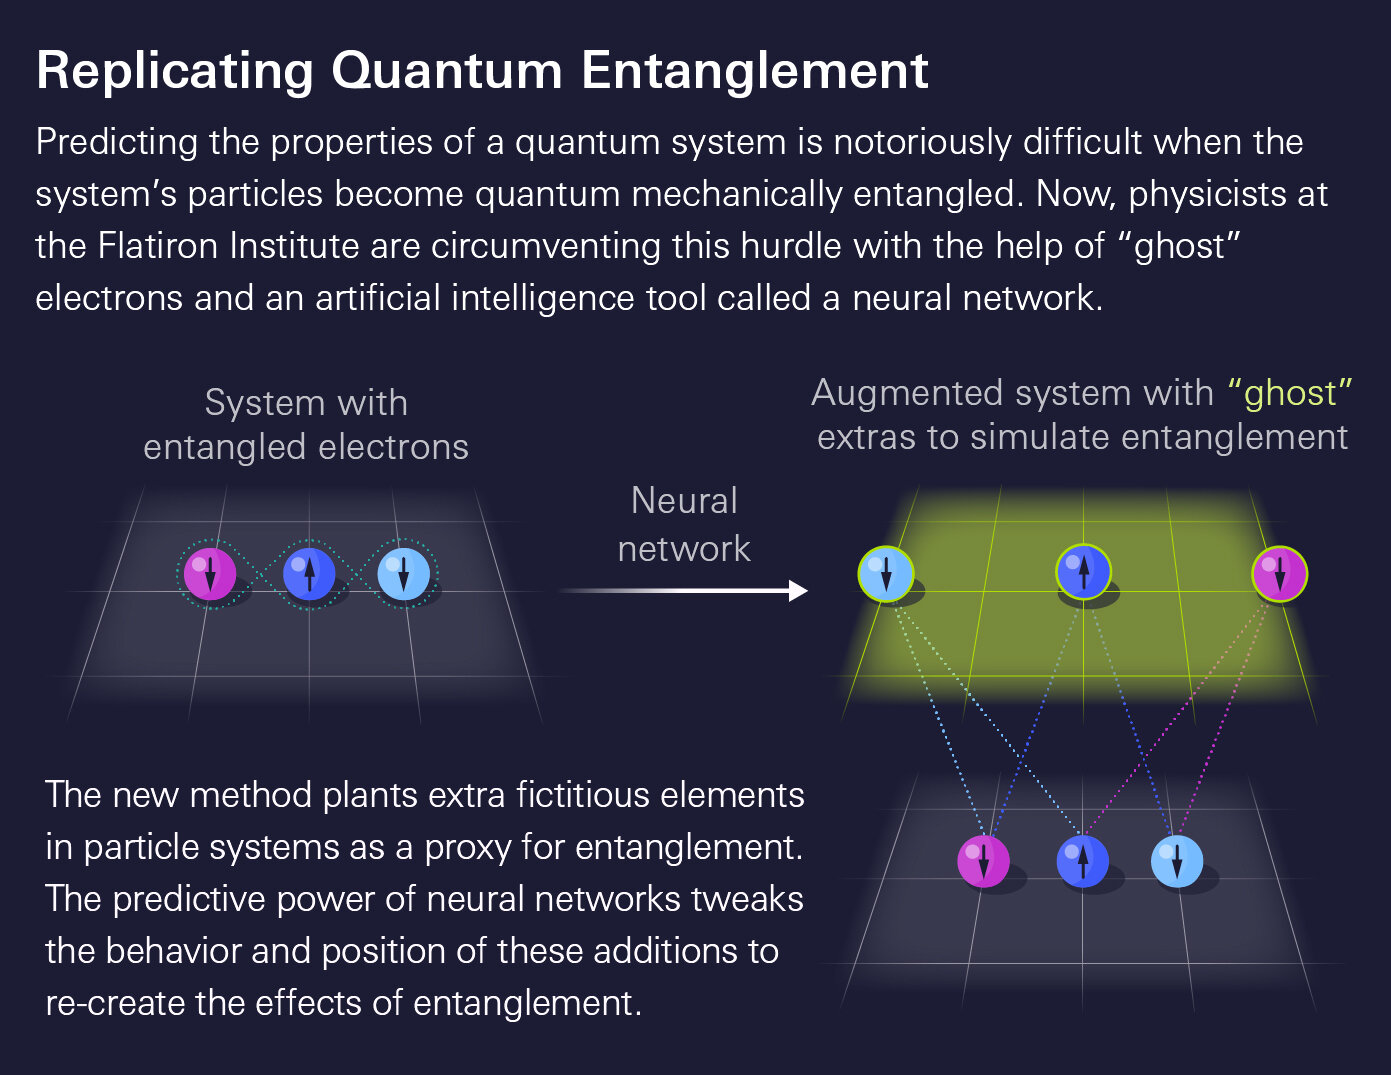 Neural networks and 'ghost' electrons accurately reconstruct behavior of quantum..